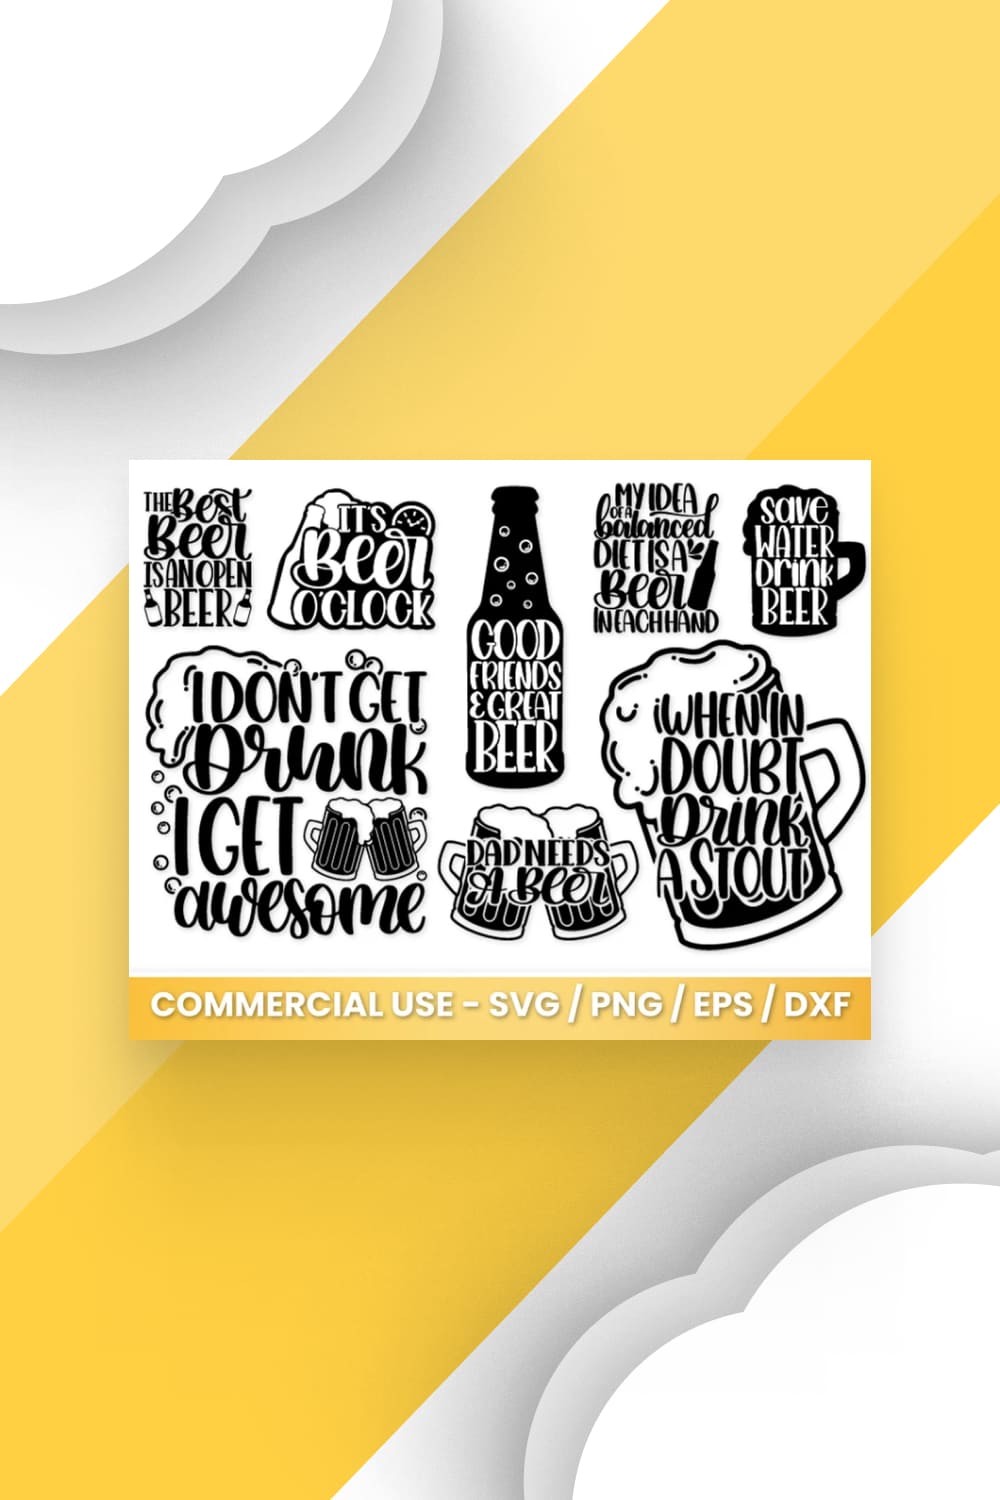 Black beer illustration and quotes for different textures.